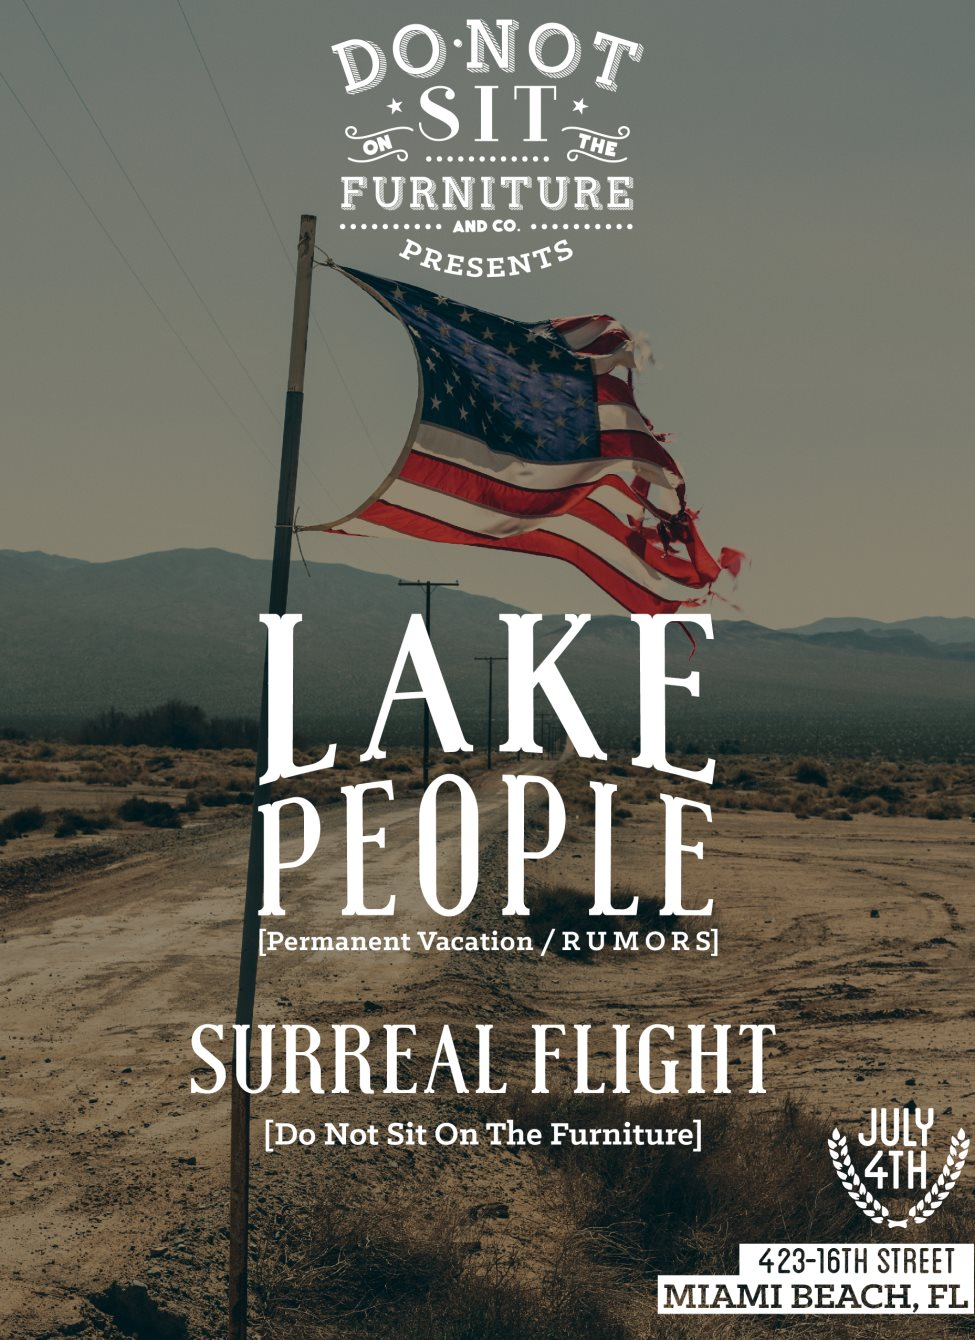 4th of July with Lake People - Flyer front